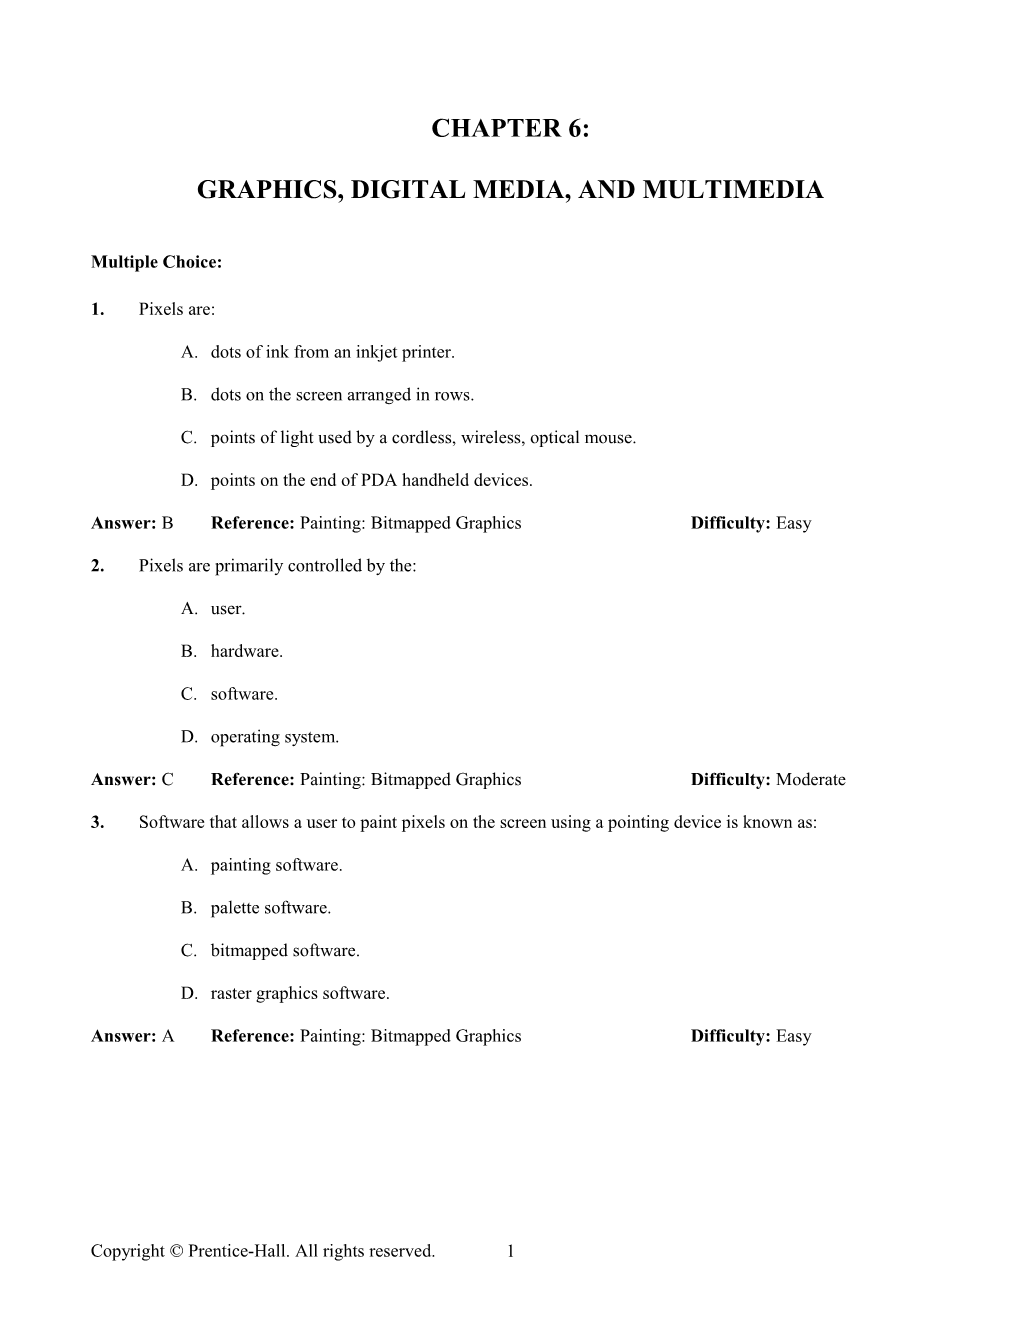 Chapter 6: Graphics, Digital Media, and Multimedia